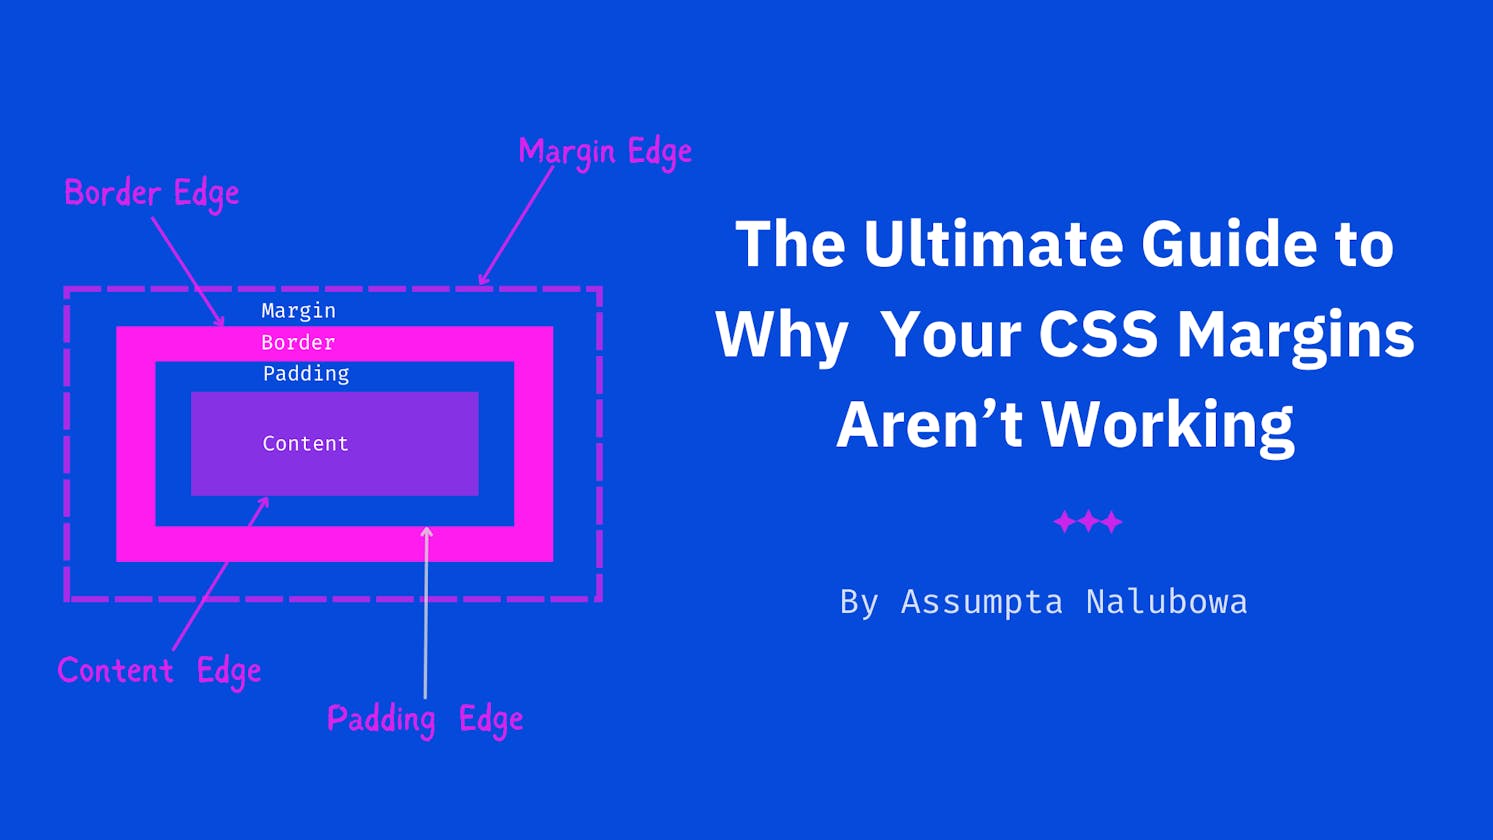 The Ultimate Guide to Why Your CSS Margins Aren’t Working